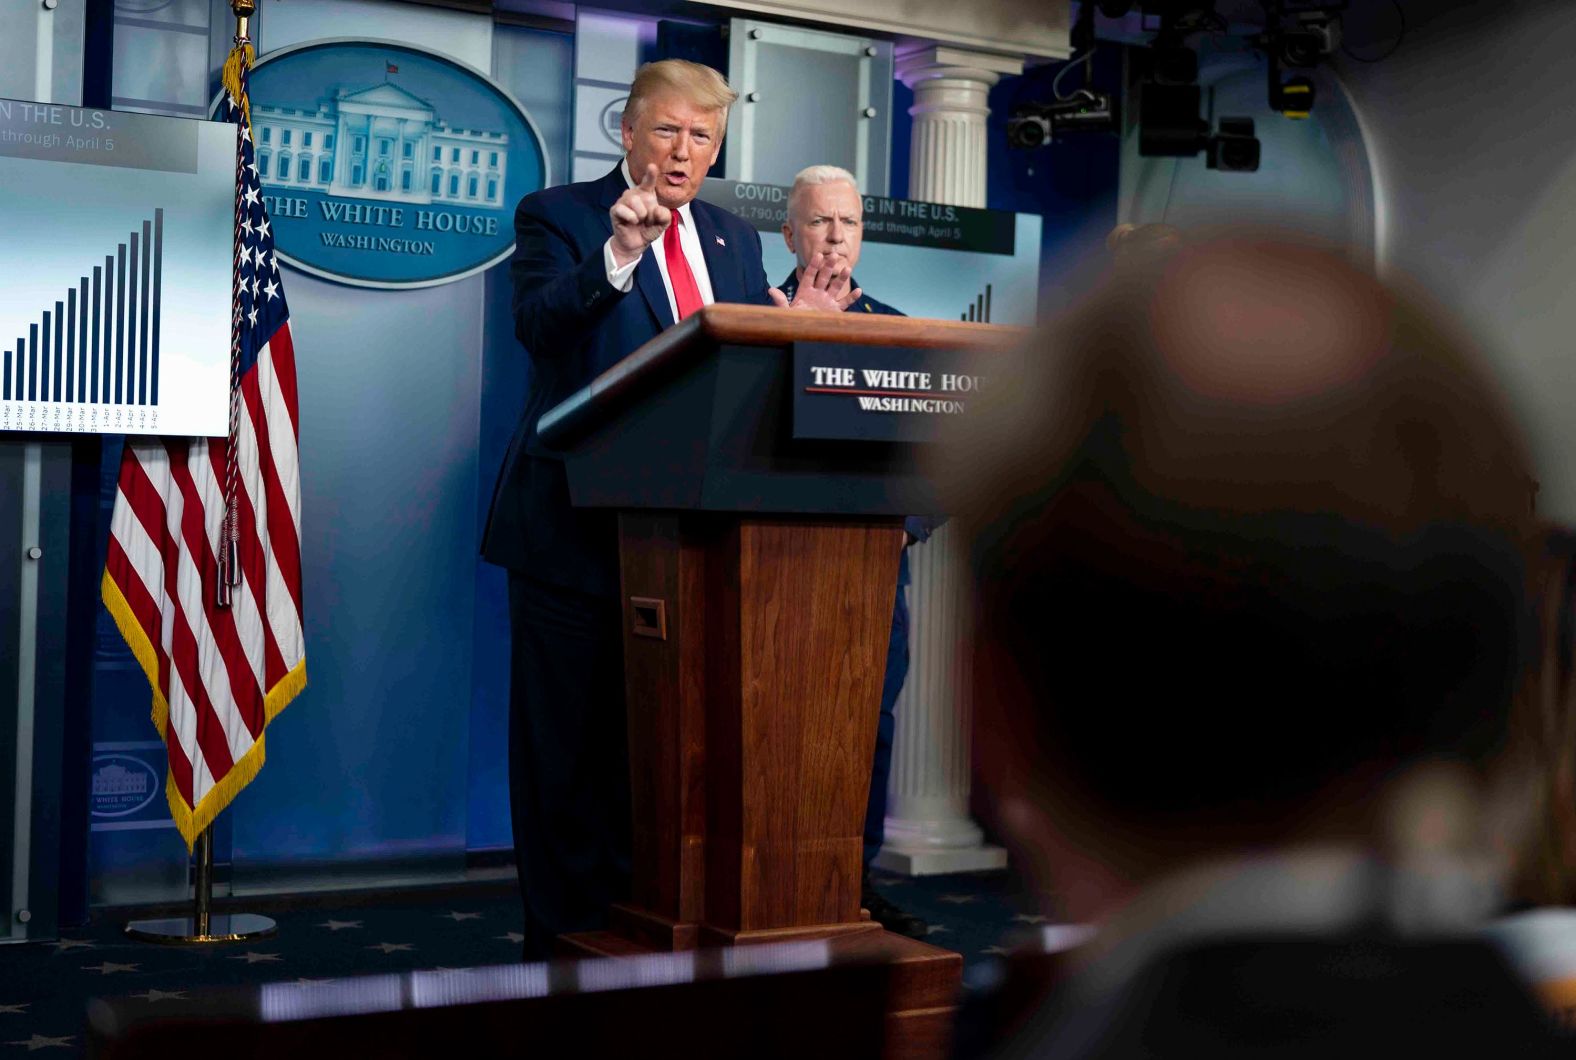 Trump speaks to members of the press during the coronavirus briefing on April 6. When asked about a <a href="https://www.cnn.com/2020/04/06/politics/department-of-health-and-human-services-shortages/index.html" target="_blank">report</a> detailing the challenges US hospitals were facing as they battled the coronavirus, Trump <a href="https://www.cnn.com/2020/04/06/politics/fact-check-trump-coronavirus-briefing-april-6/index.html" target="_blank">repeatedly criticized reporters and frequently departed from his prepared text.</a> When Admiral Dr. Brett Giroir, pictured behind Trump, spoke about Covid-19 testing, he said, "I don't know the inspector general. I don't know that person." Trump then asked reporters in the room if they knew how long the inspector general had been in government. ABC News' Jonathan Karl, seated in the foreground, responded that Christi Grimm, the principal deputy inspector general for the Department of Health and Human Services, "did serve in the previous administration." Trump responded: "Oh, you didn't tell me that. Oh, I see. You didn't tell me that, Jon. You didn't tell me that. ... You mean the Obama administration. Thank you for telling me that. See, there's the typical fake-news deal. Look, you're a third-rate reporter. And what you just said is a disgrace, O.K.? ... Thank you very much, Jon. Thank you very much. You will never make it."